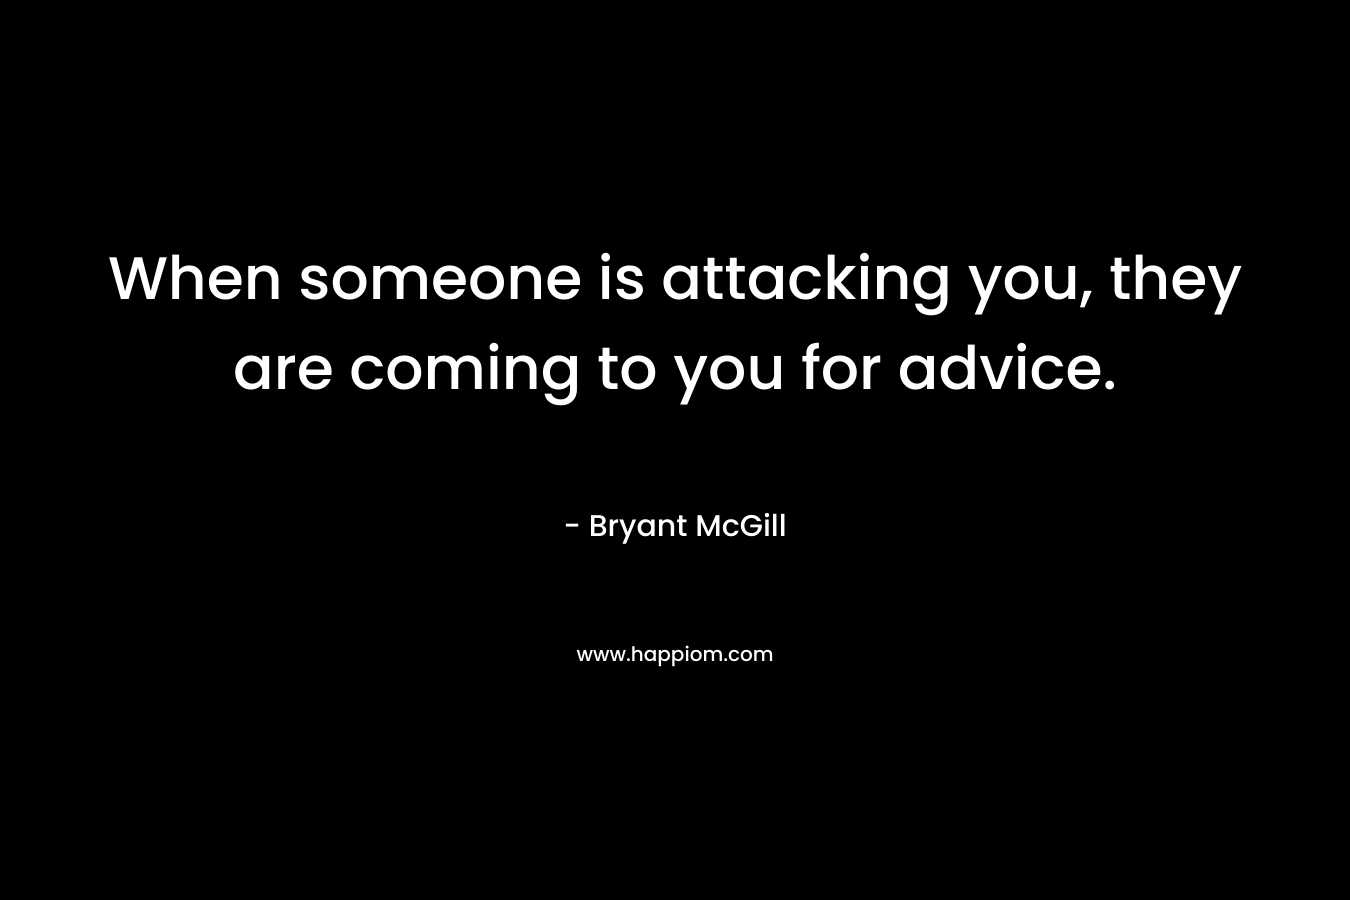 When someone is attacking you, they are coming to you for advice. – Bryant McGill